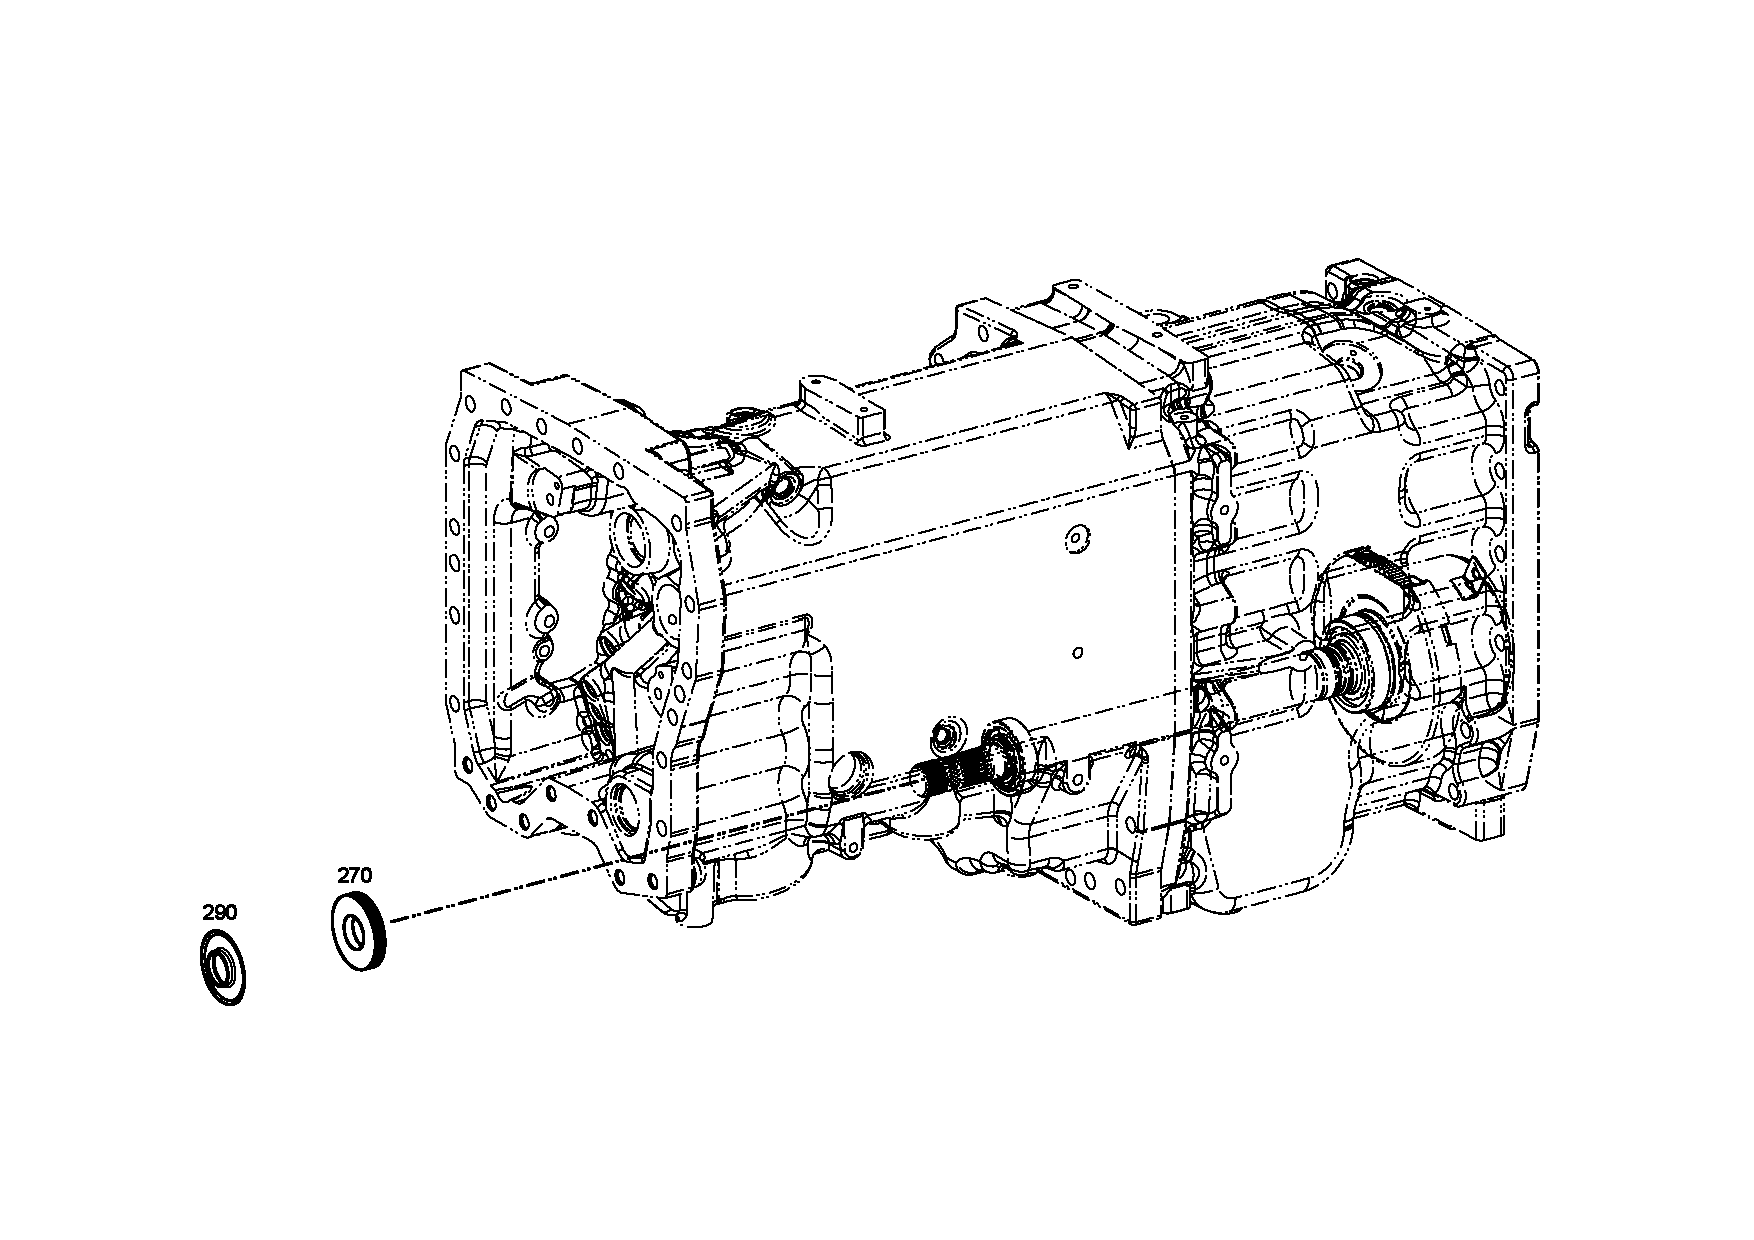 drawing for SKF BB1-4566A - BALL BEARING (figure 2)